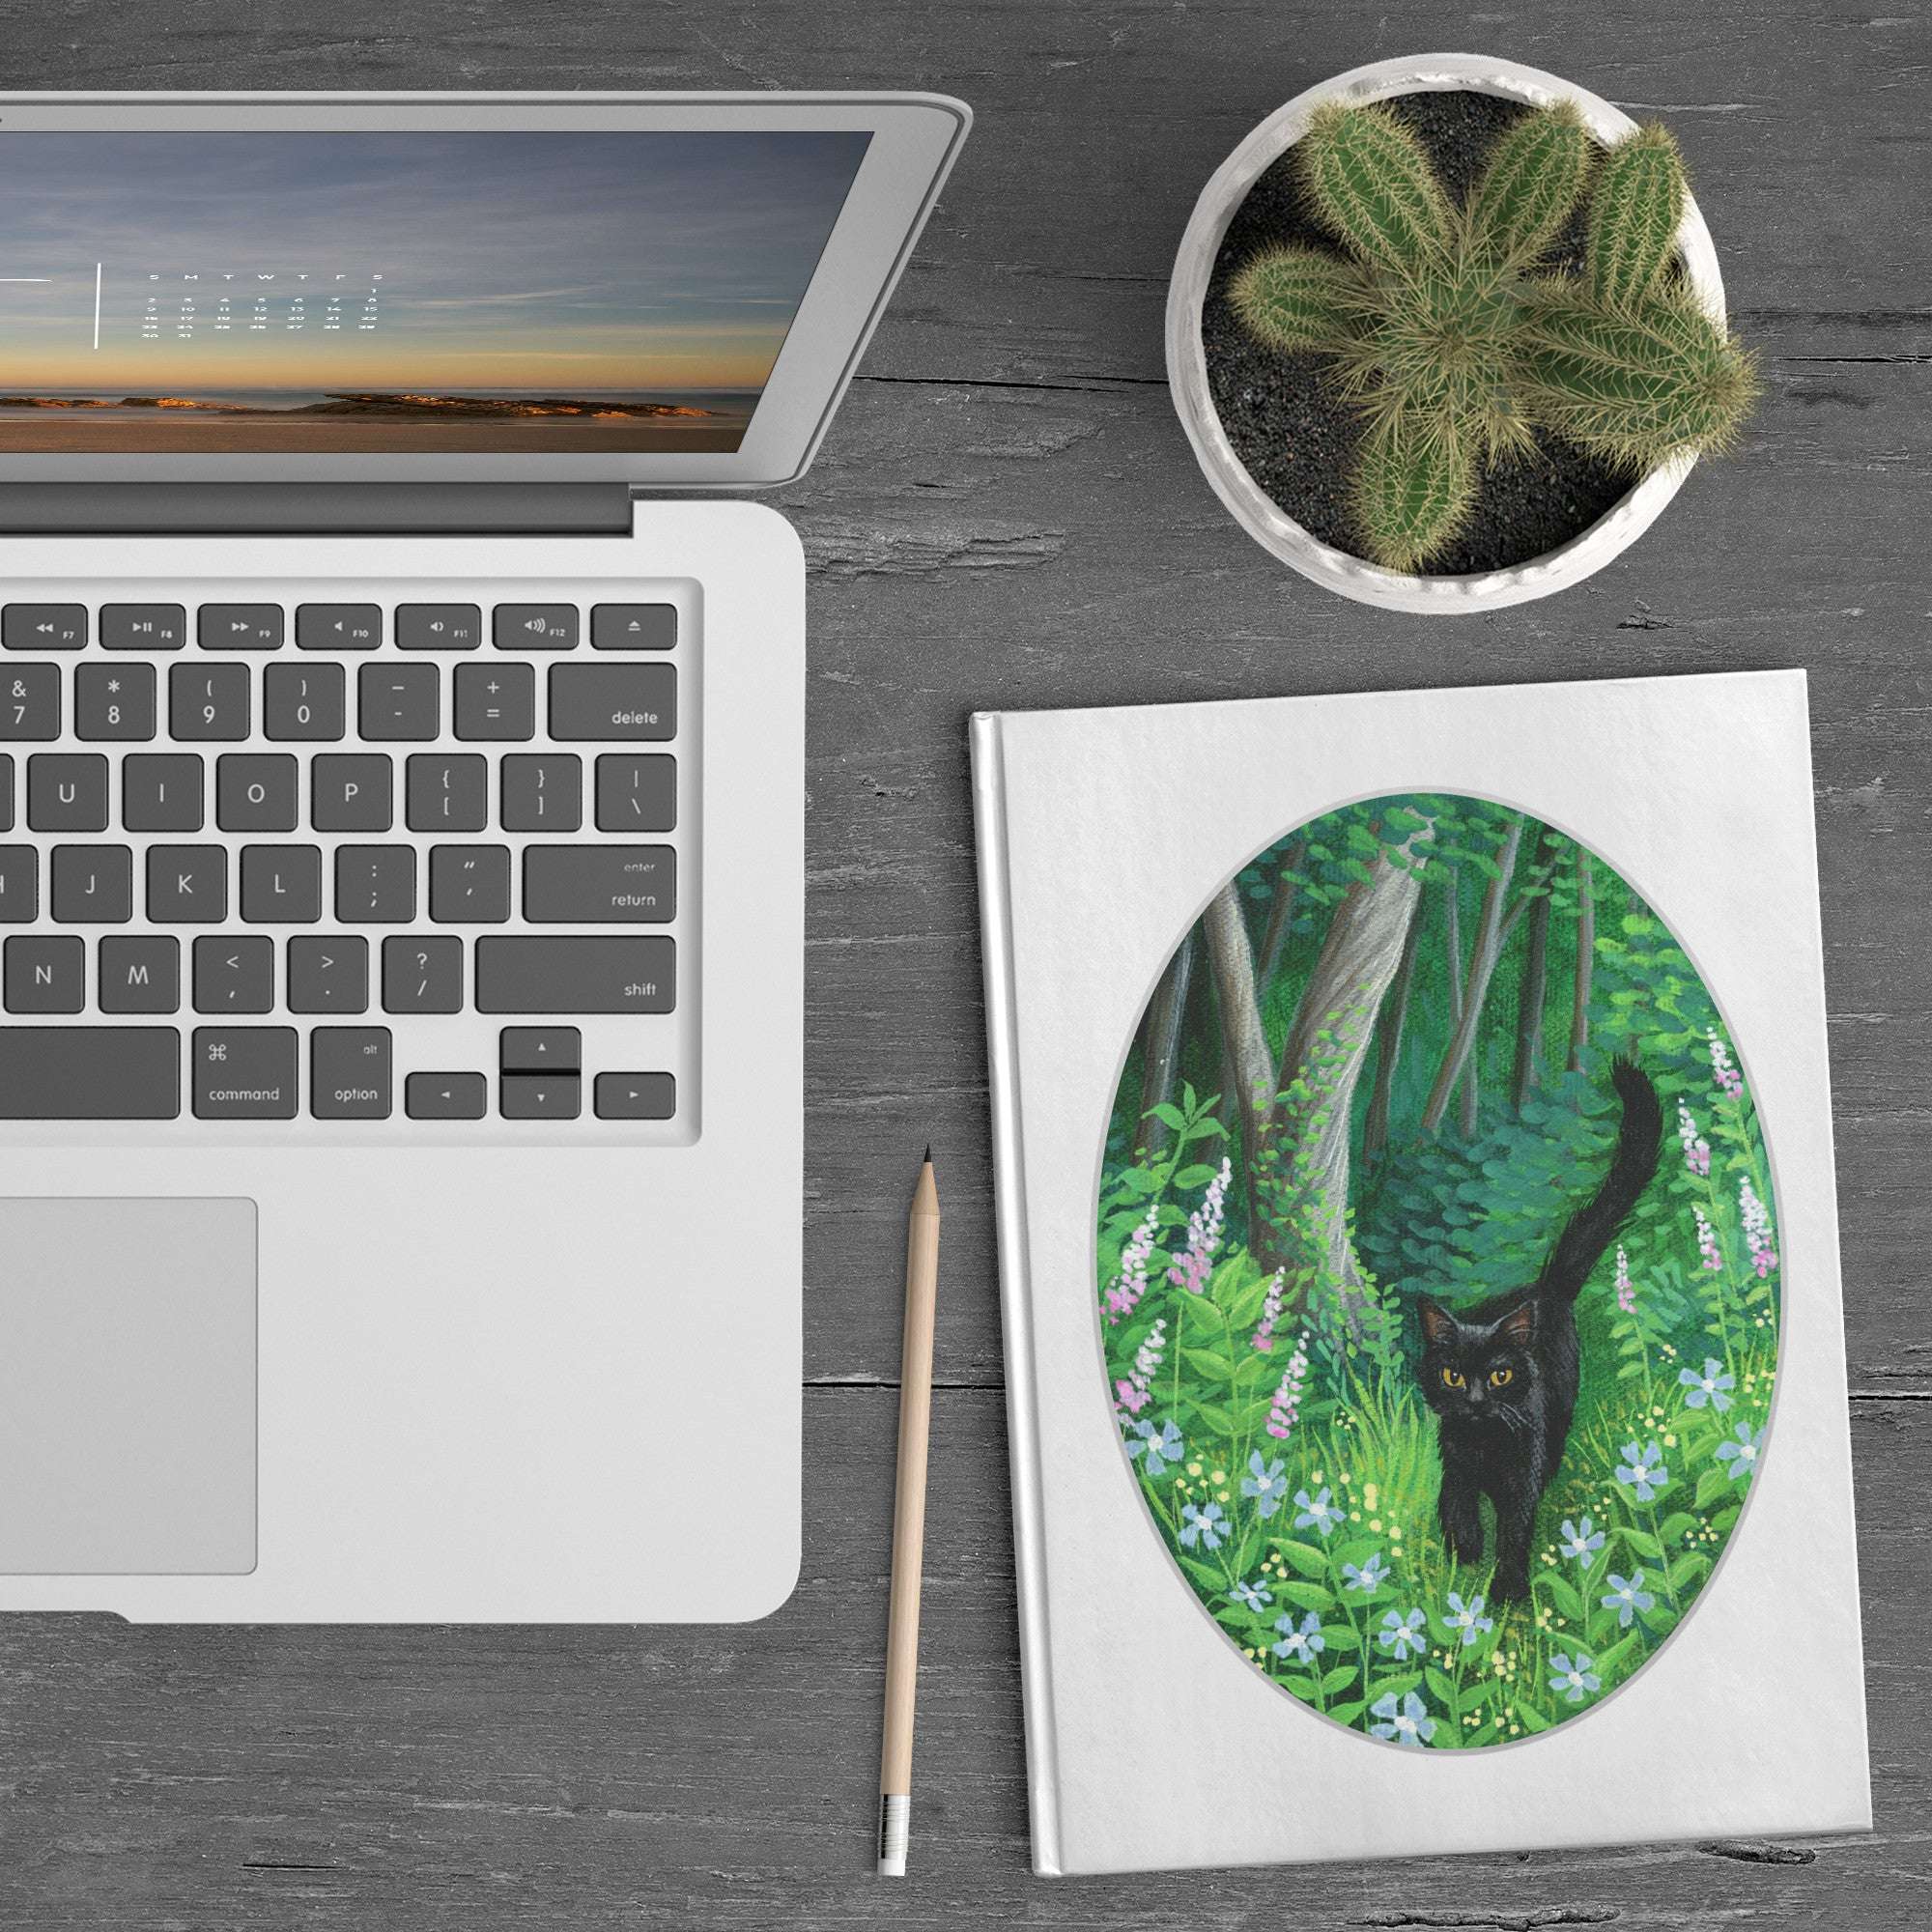 A laptop, Whiskered Welcome Journal with a black cat illustration, pencil, and a potted cactus on a wooden desk.